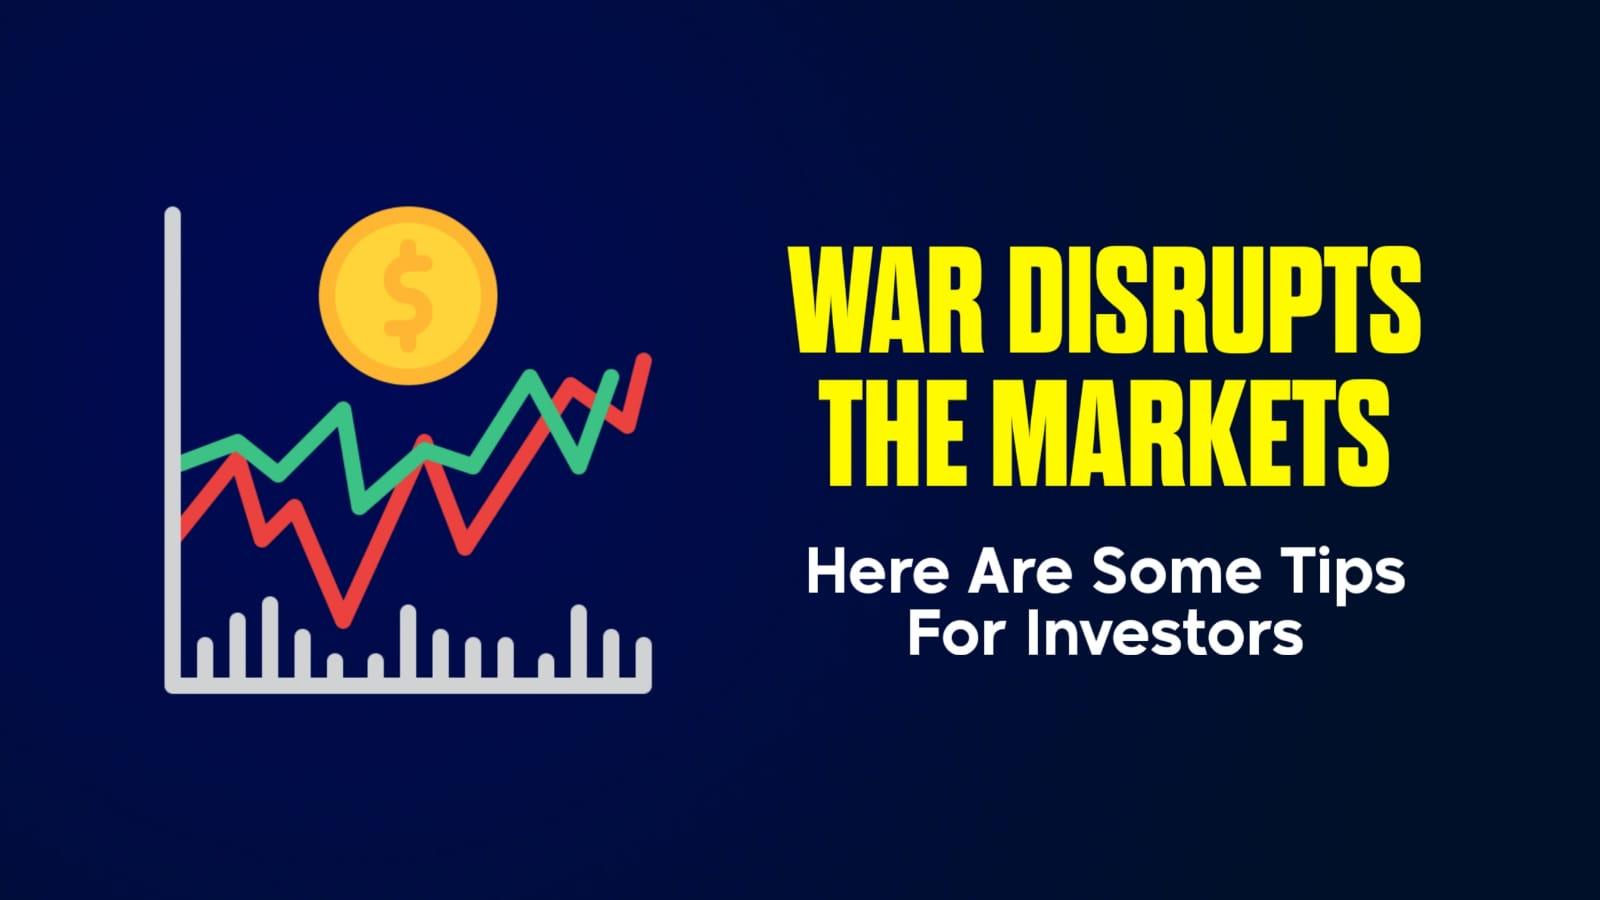 War disrupts the markets. Here are some smart tips for investors